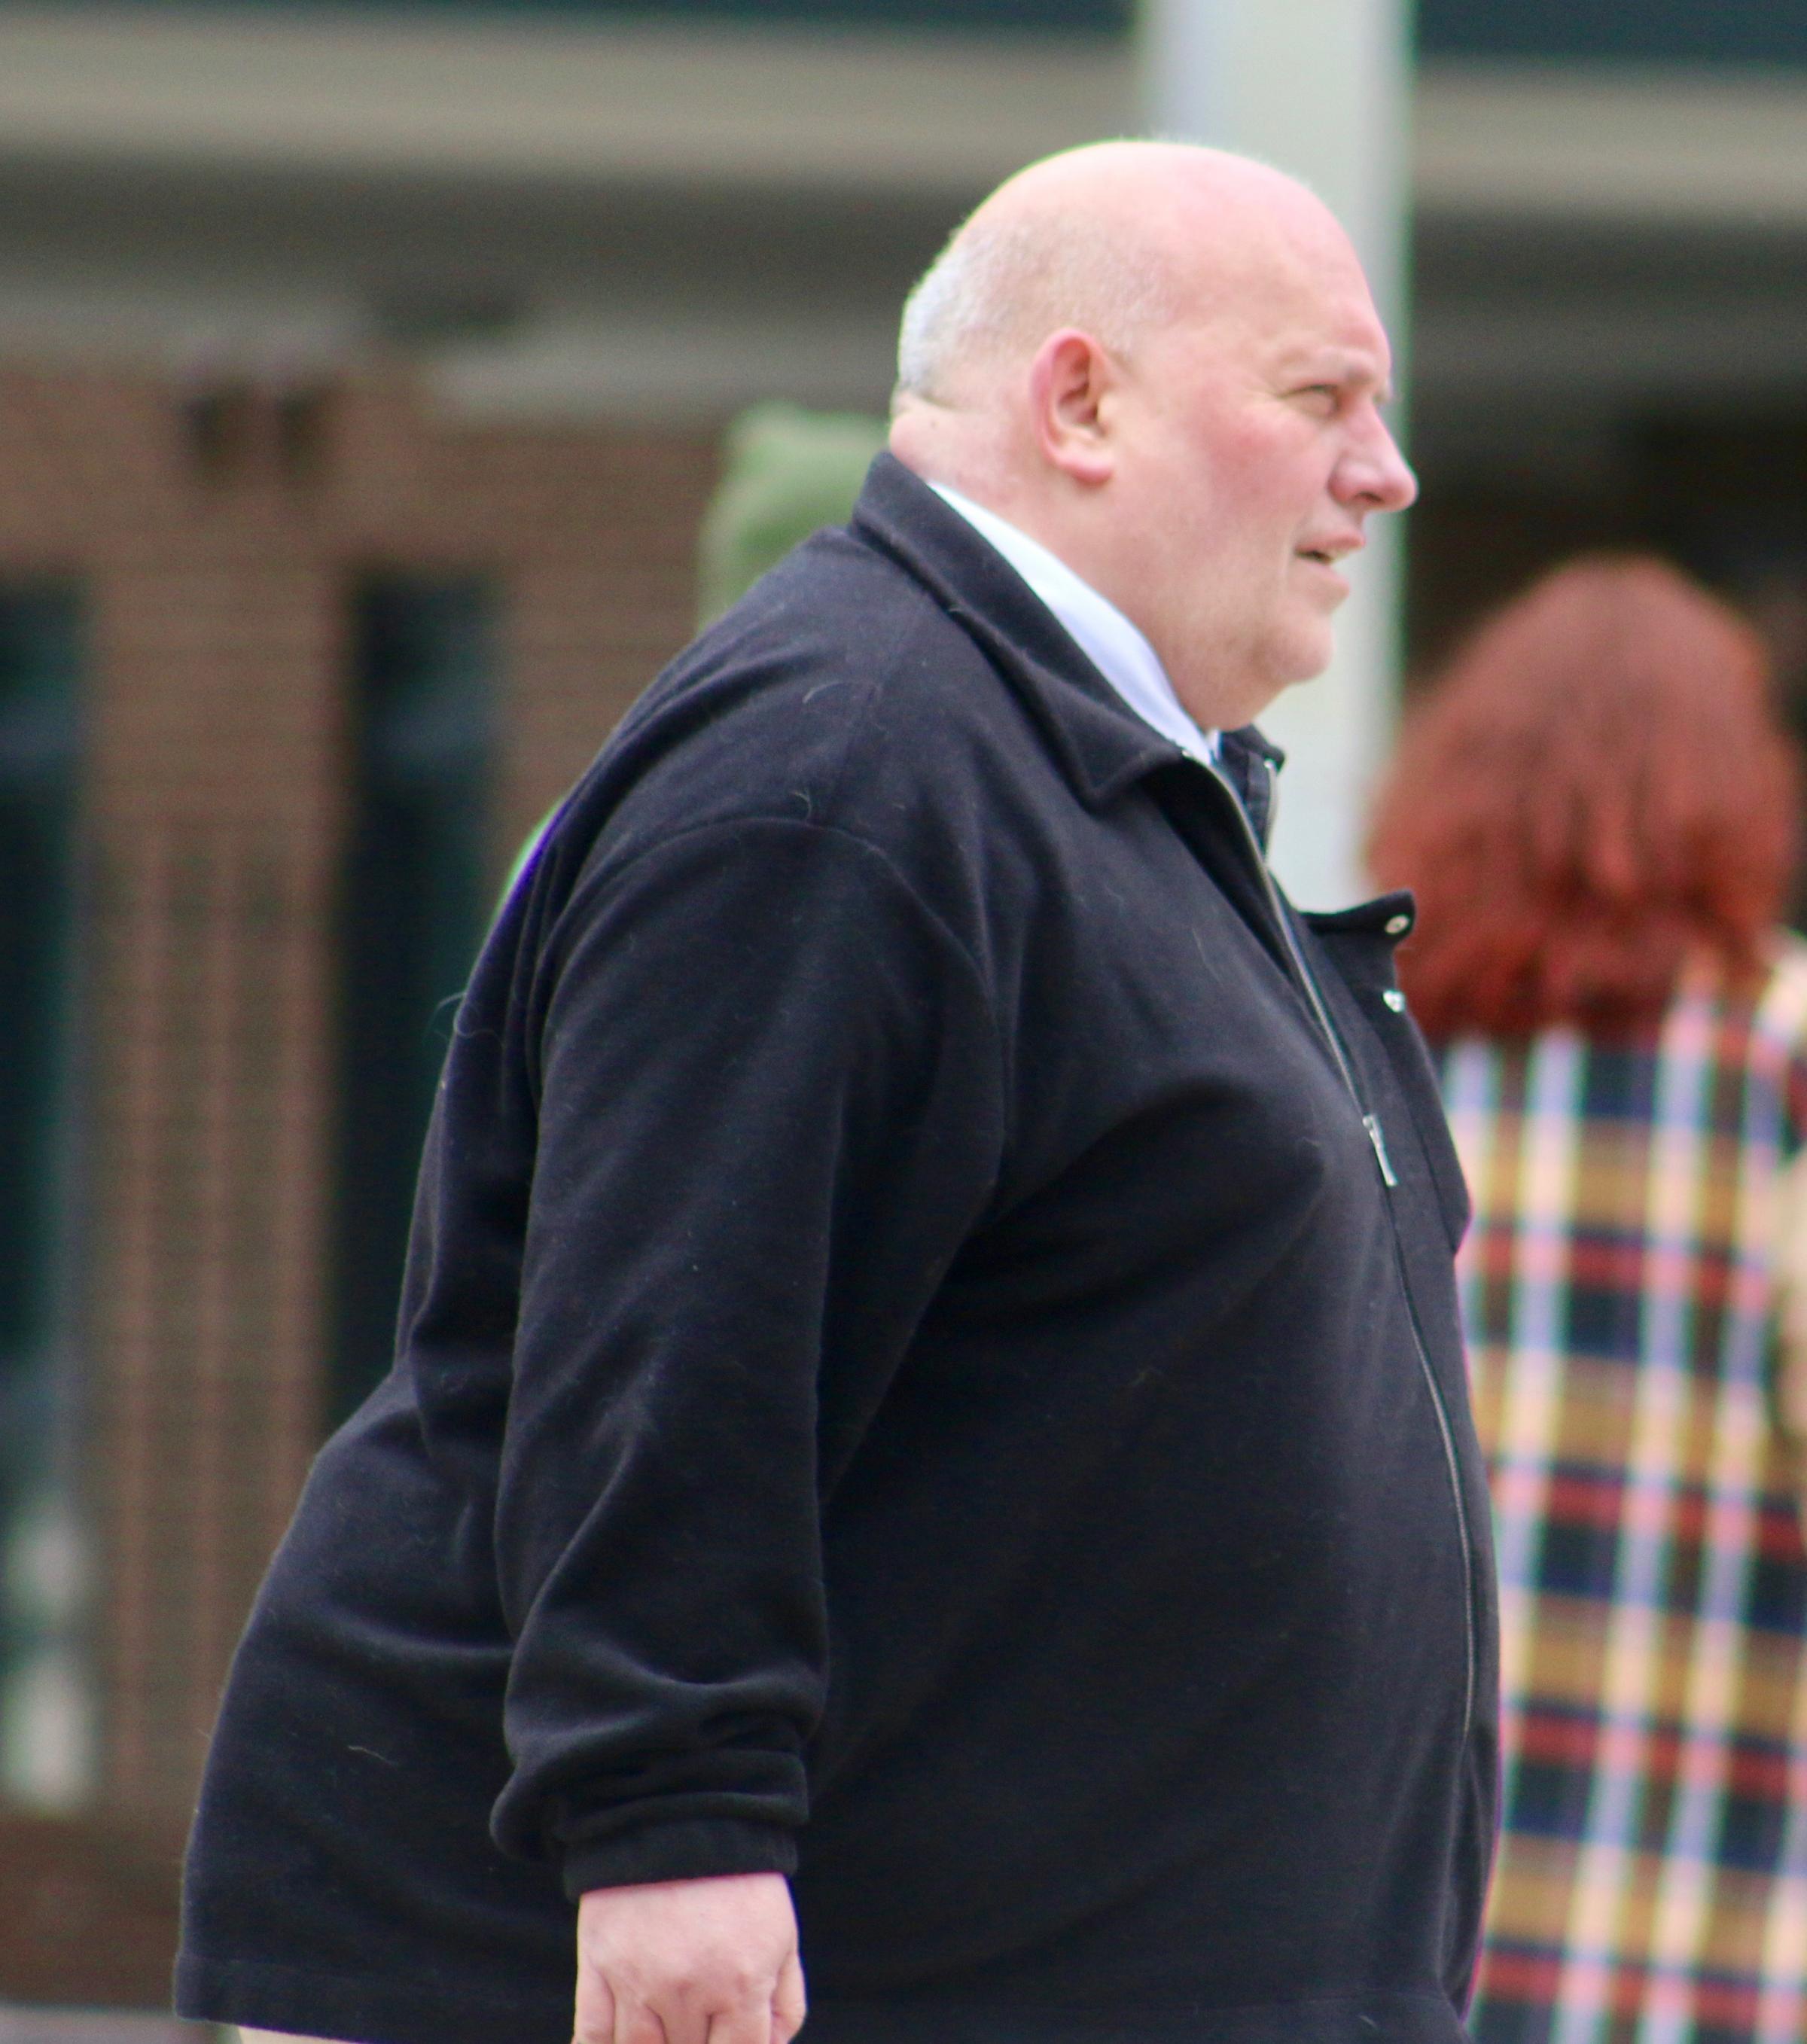 Terrence Bann leaving Liverpool Crown Court with a suspended prison sentence